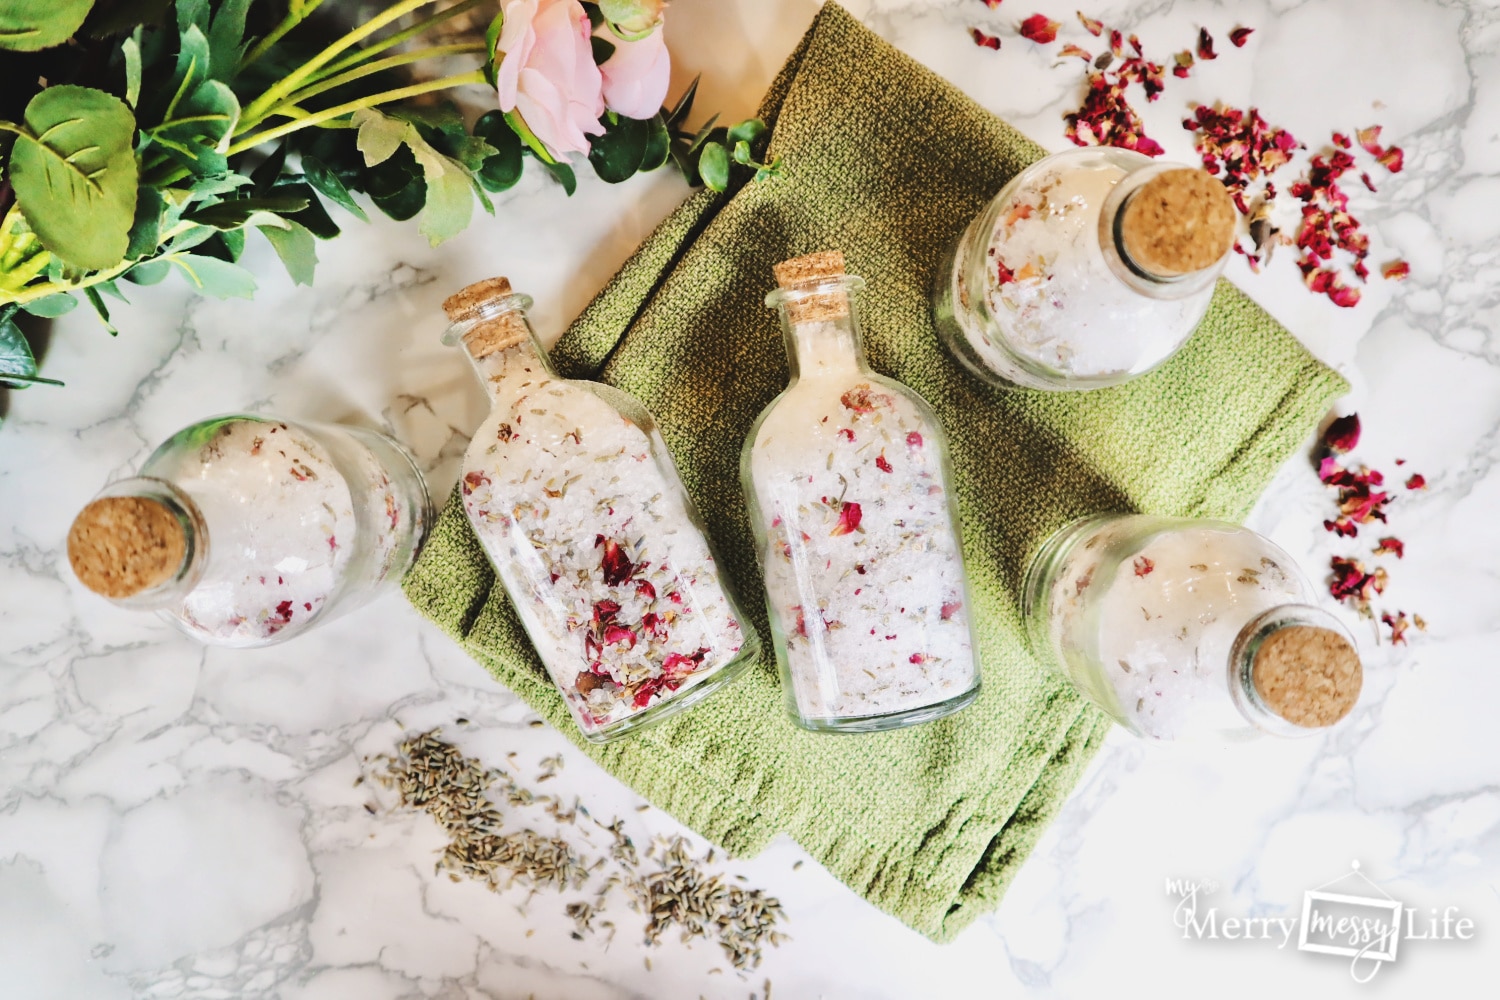 Homemade bath salts recipe with rose and lavender petals